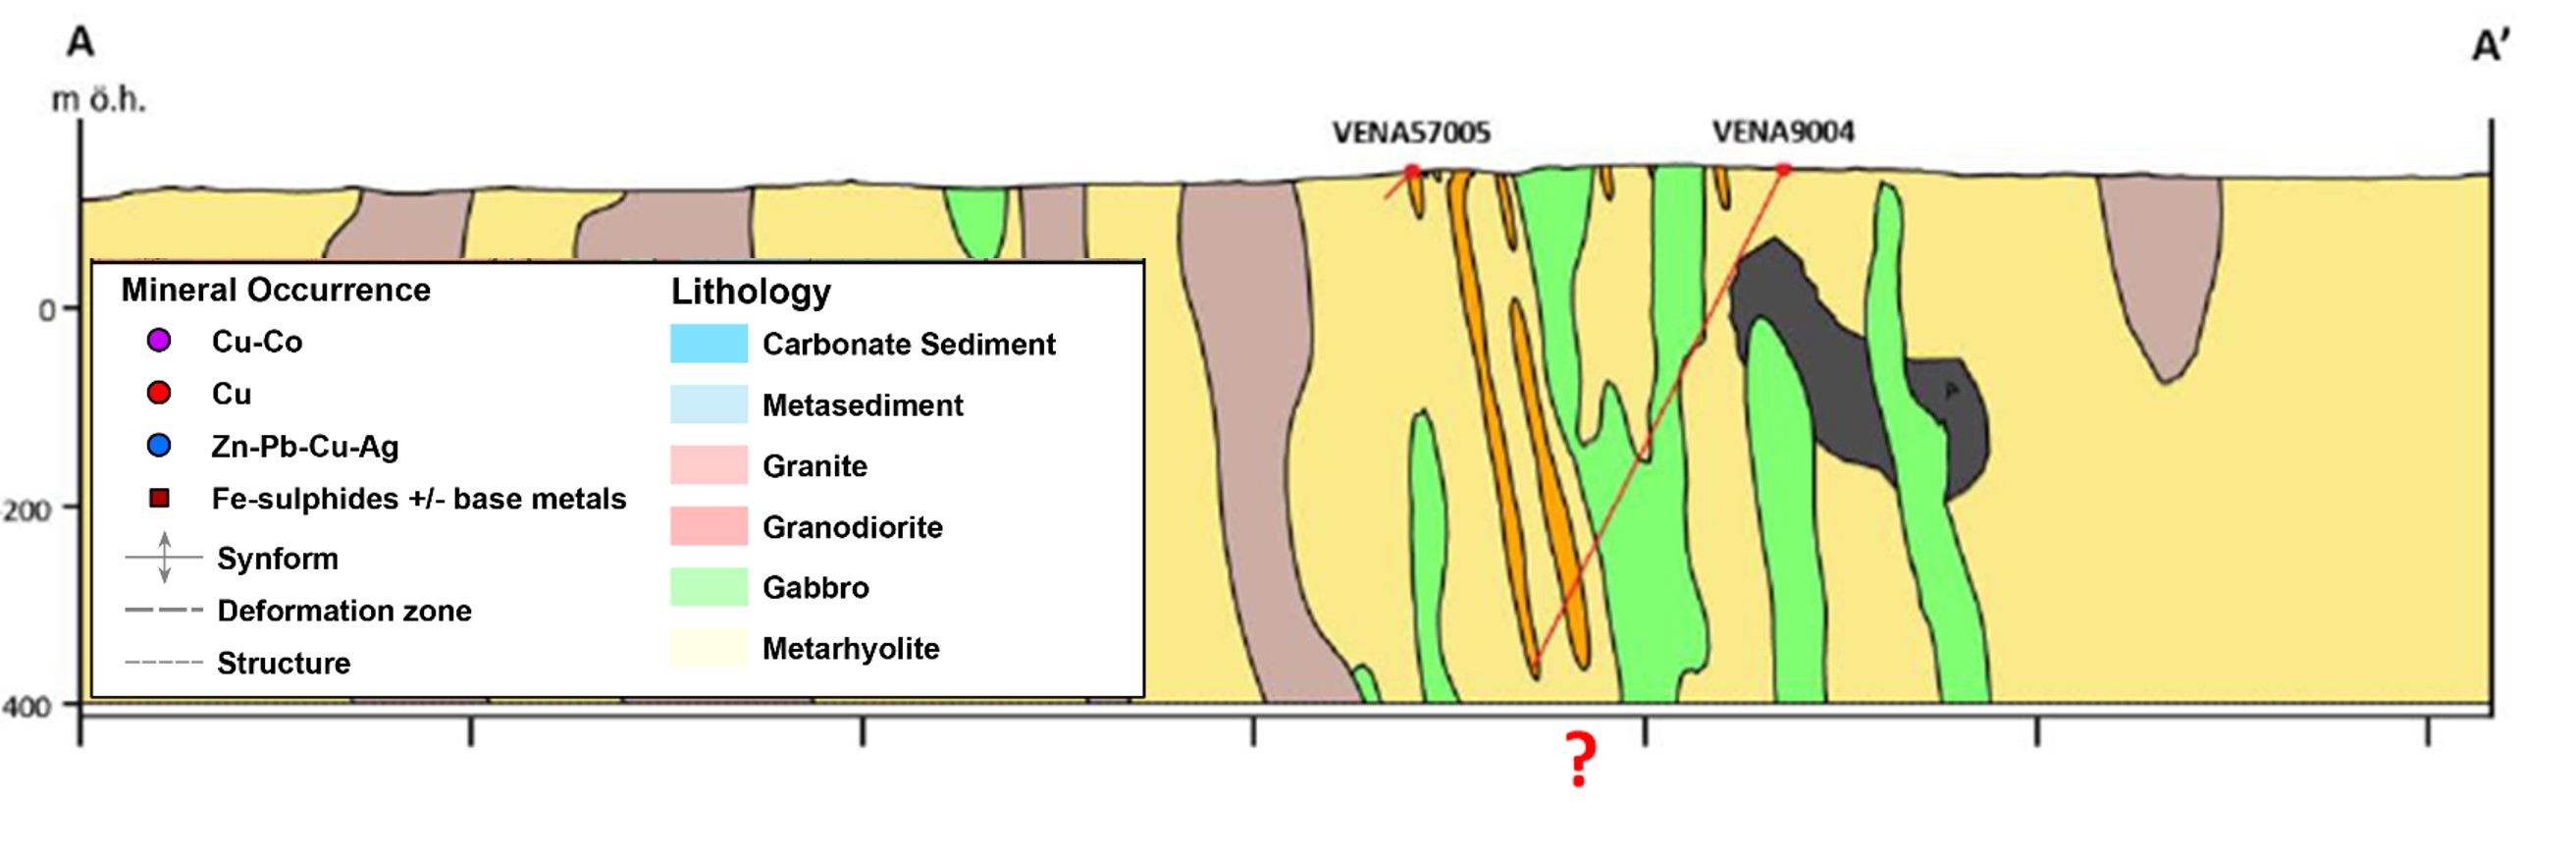 Geological cross section map of Vena project